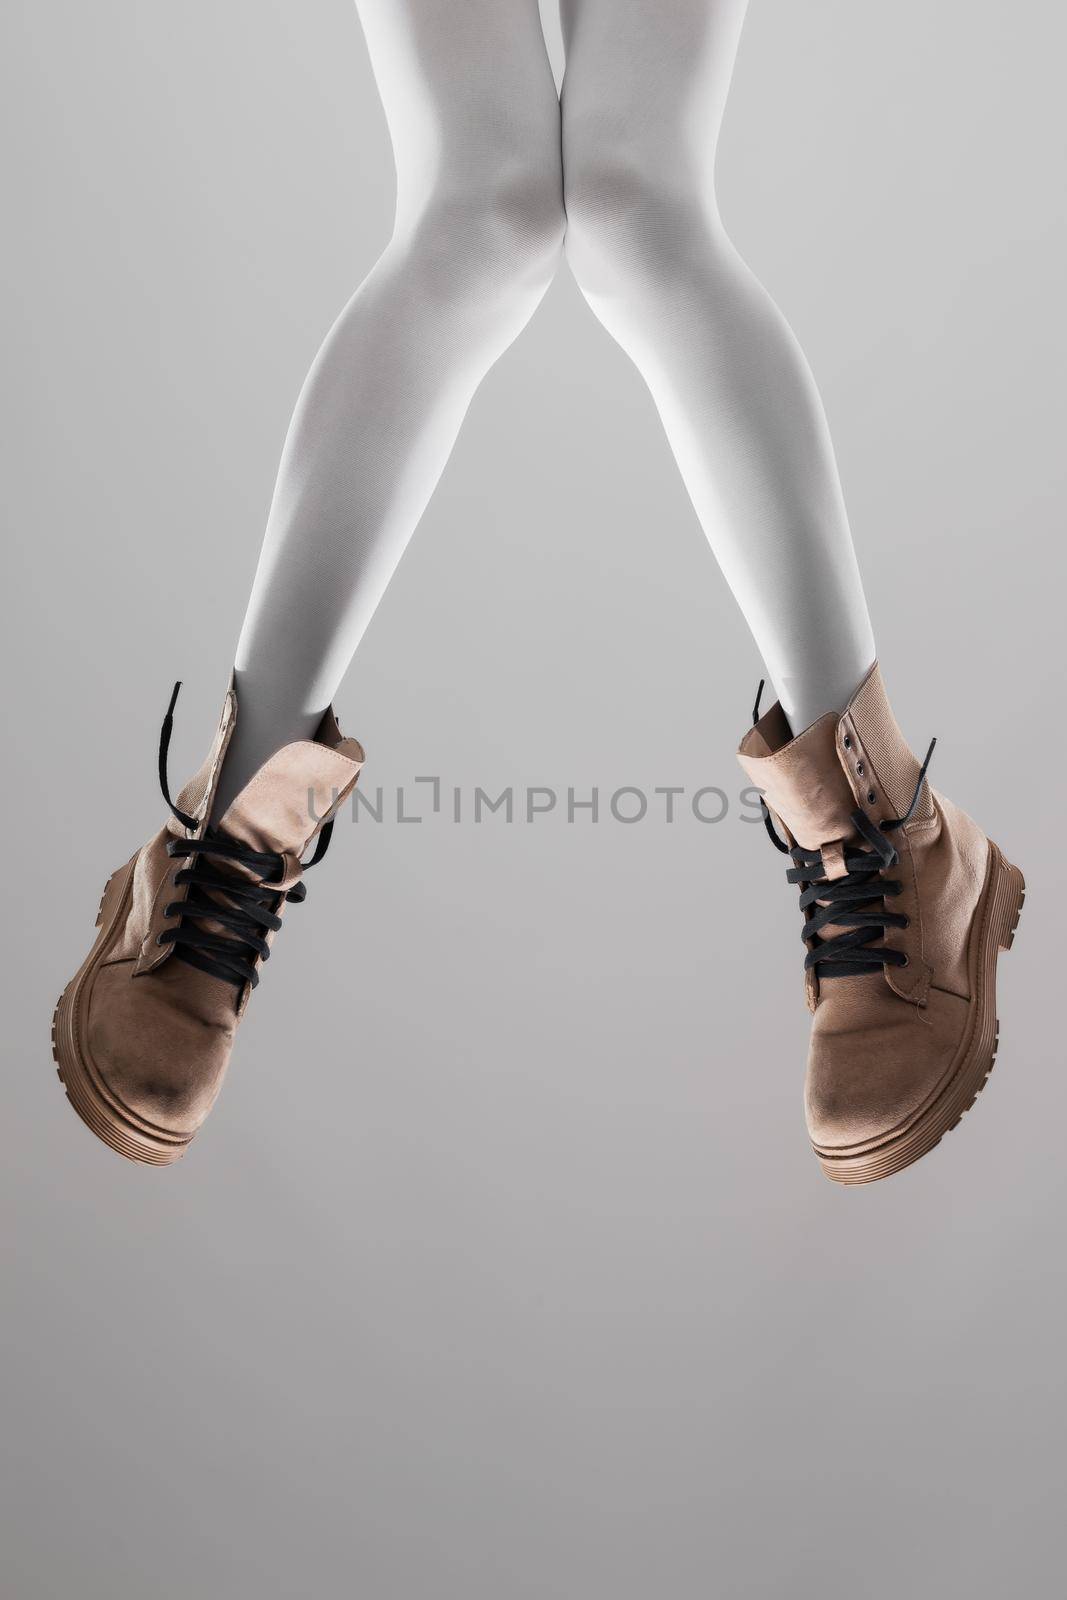 Sexy female legs with white leggings and waterproof boots.. by kokimk